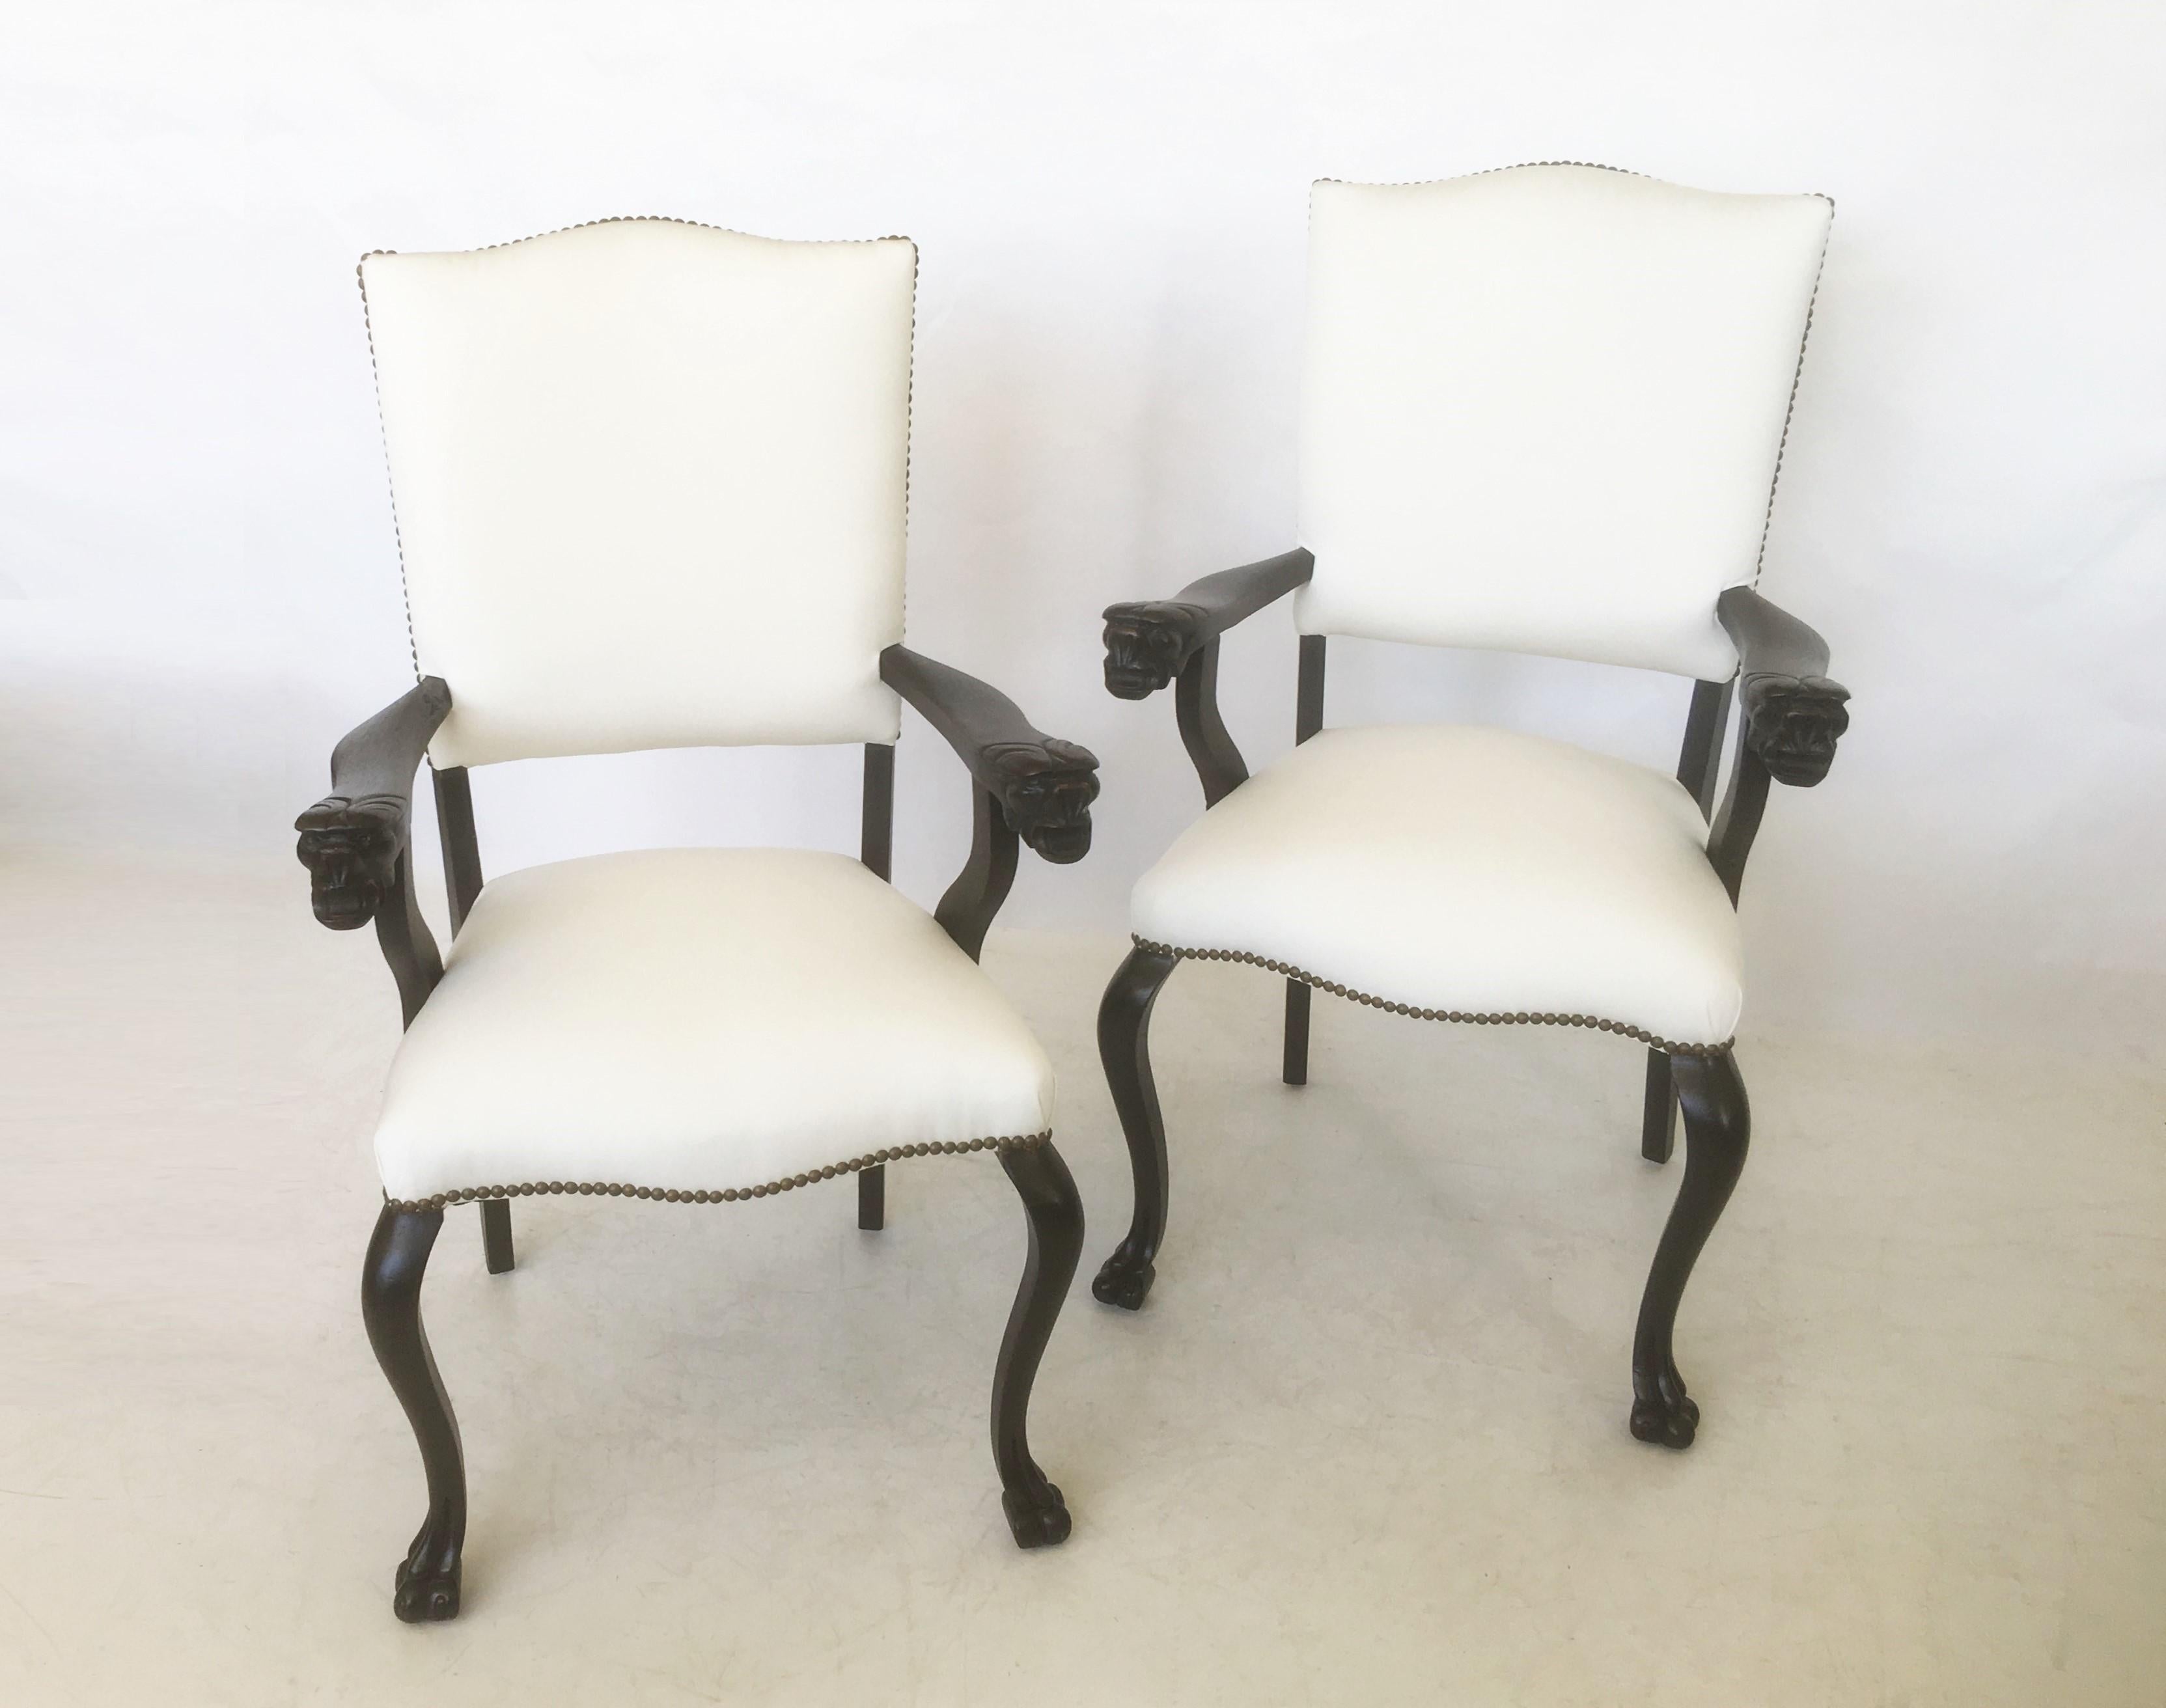 An attractive pair of restored carved walnut armchairs, Italy, circa 19th century. Each chair features a curved crest rail, padded back and seat covered in a new sturdy cotton fabric and bronze nailhead trim. Two wooden open arms adorned with carved